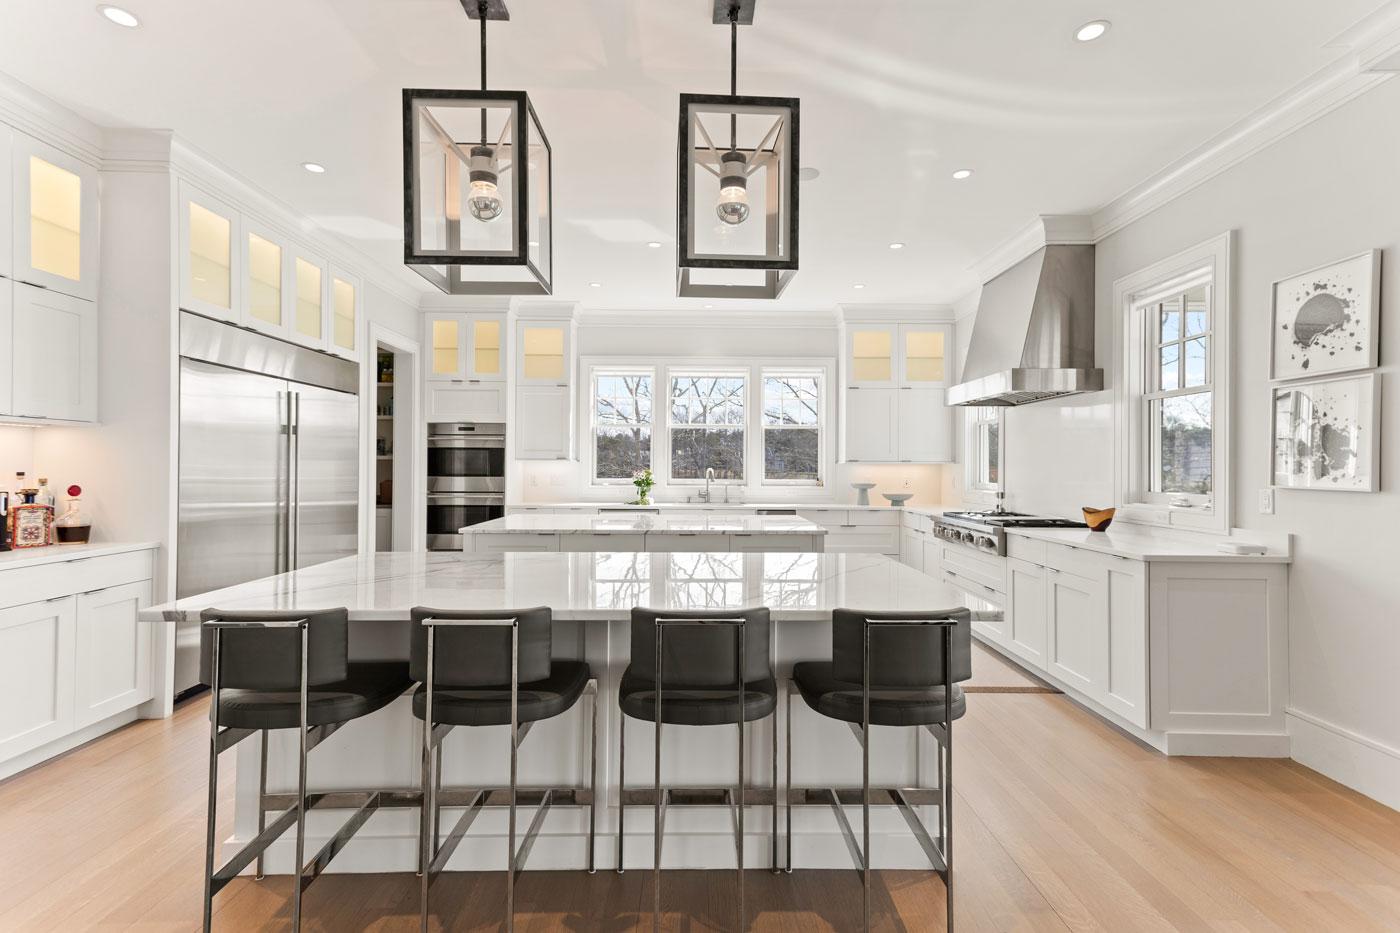 modern white kitchen with 2 big stone islands in the center